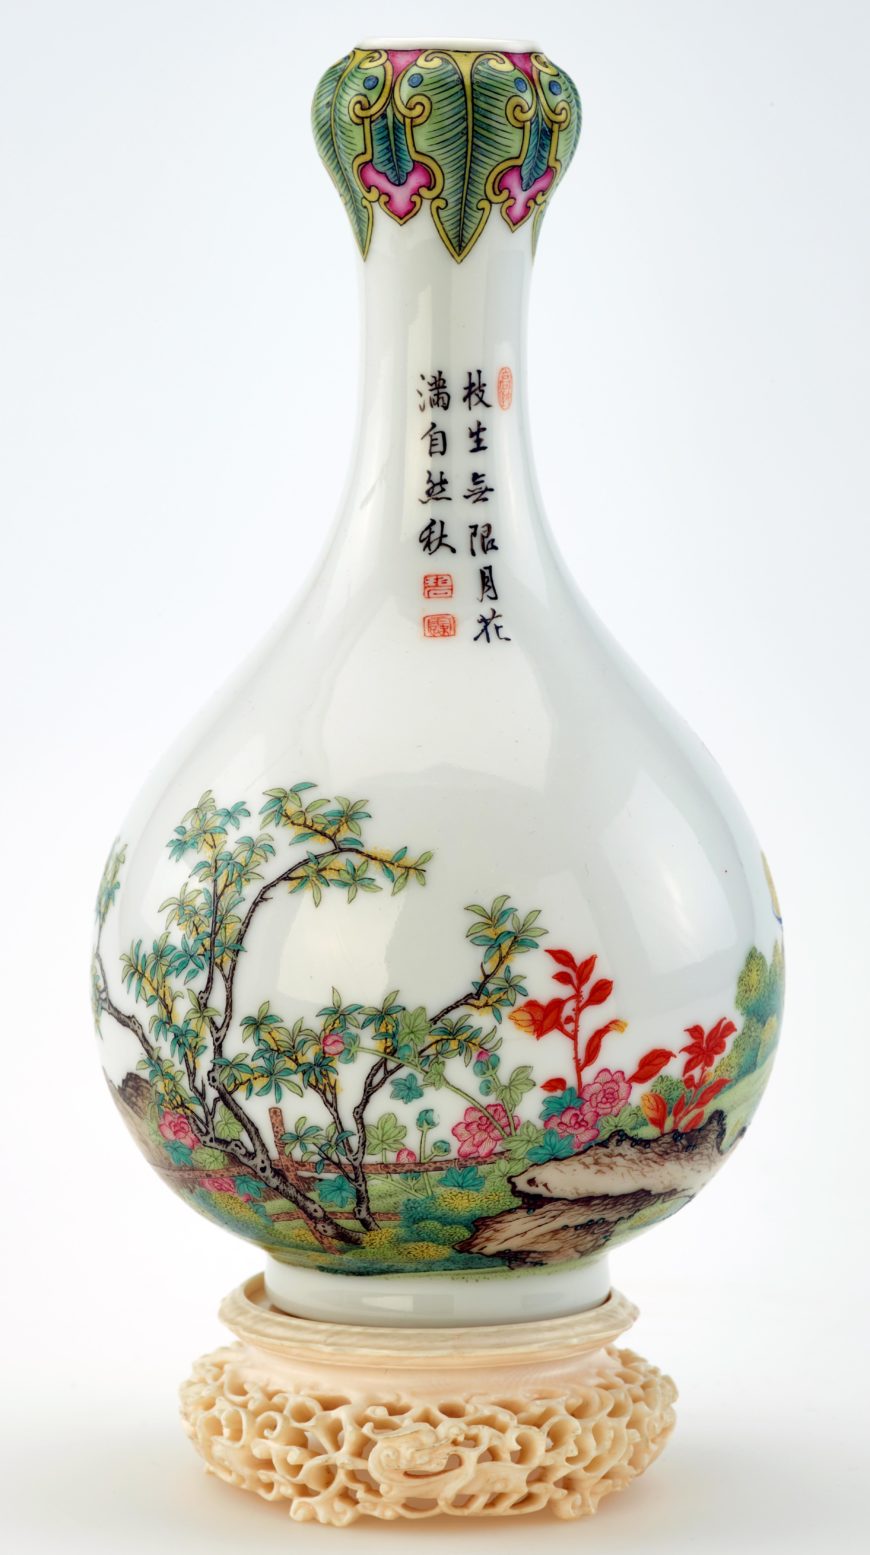 Vase of bottle shape with “garlic” mouth, Qing dynasty or possibly modern, Qianlong reign, 1736-1795, or possibly early 20th century, Jingdezhen ware, porcelain with enamels over clear, colorless glaze; ivory stand, China, Jiangxi province, Jingdezhen, 17.2 x 9.5 cm (Freer Gallery of Art, Smithsonian Institution, Washington, DC: Purchase — Charles Lang Freer Endowment, F1954.127a-e)